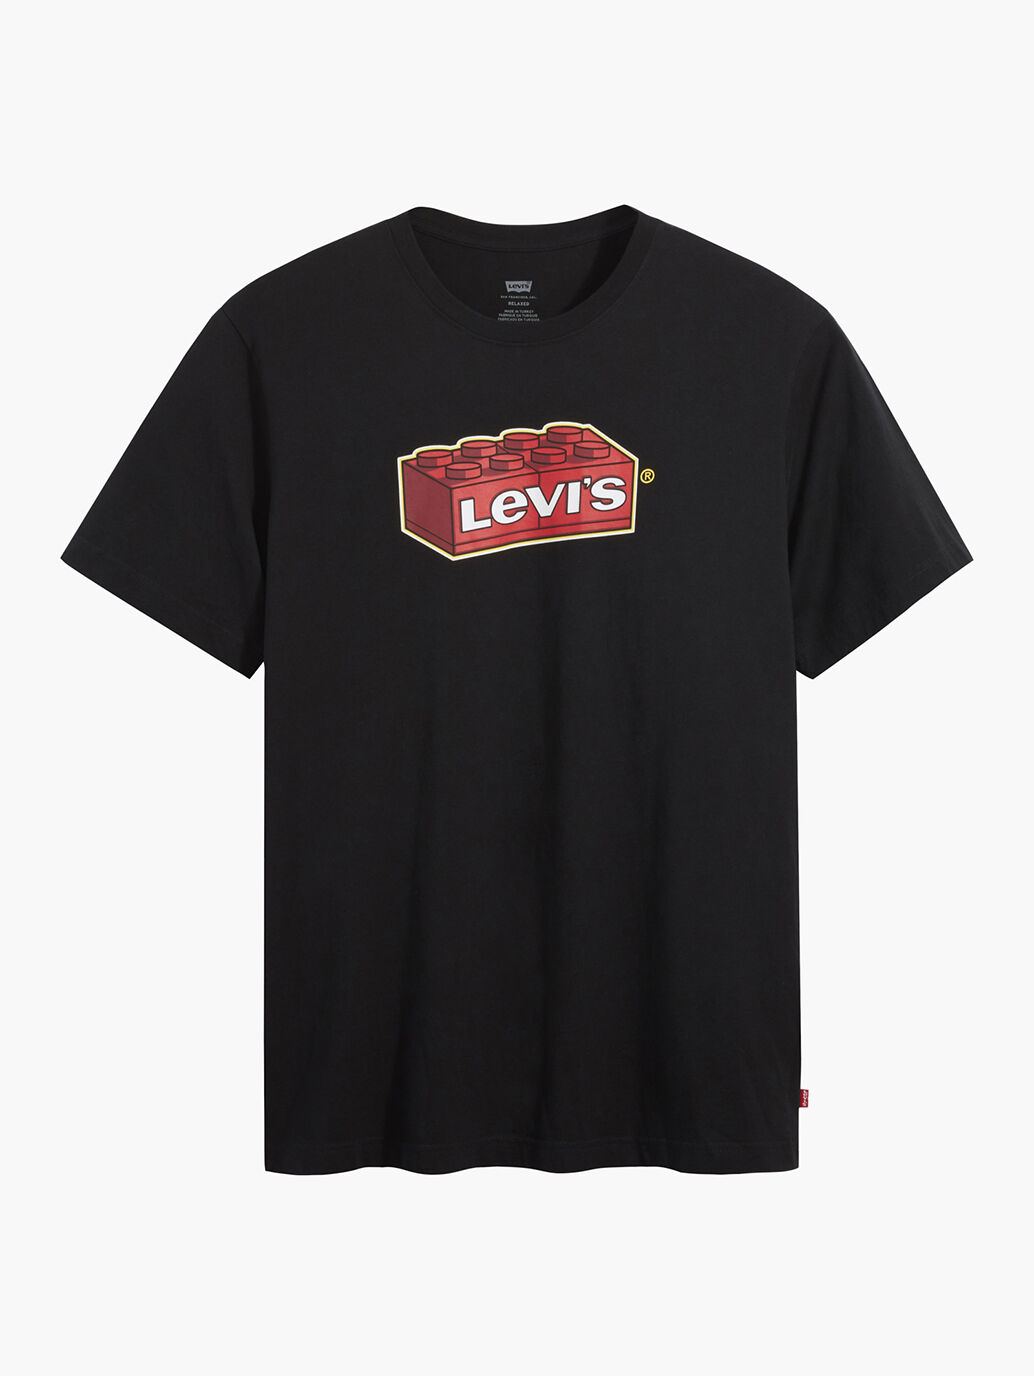 LEGO® x Levi’s®: Classic Levi’s® style meets the youthful energy of ...